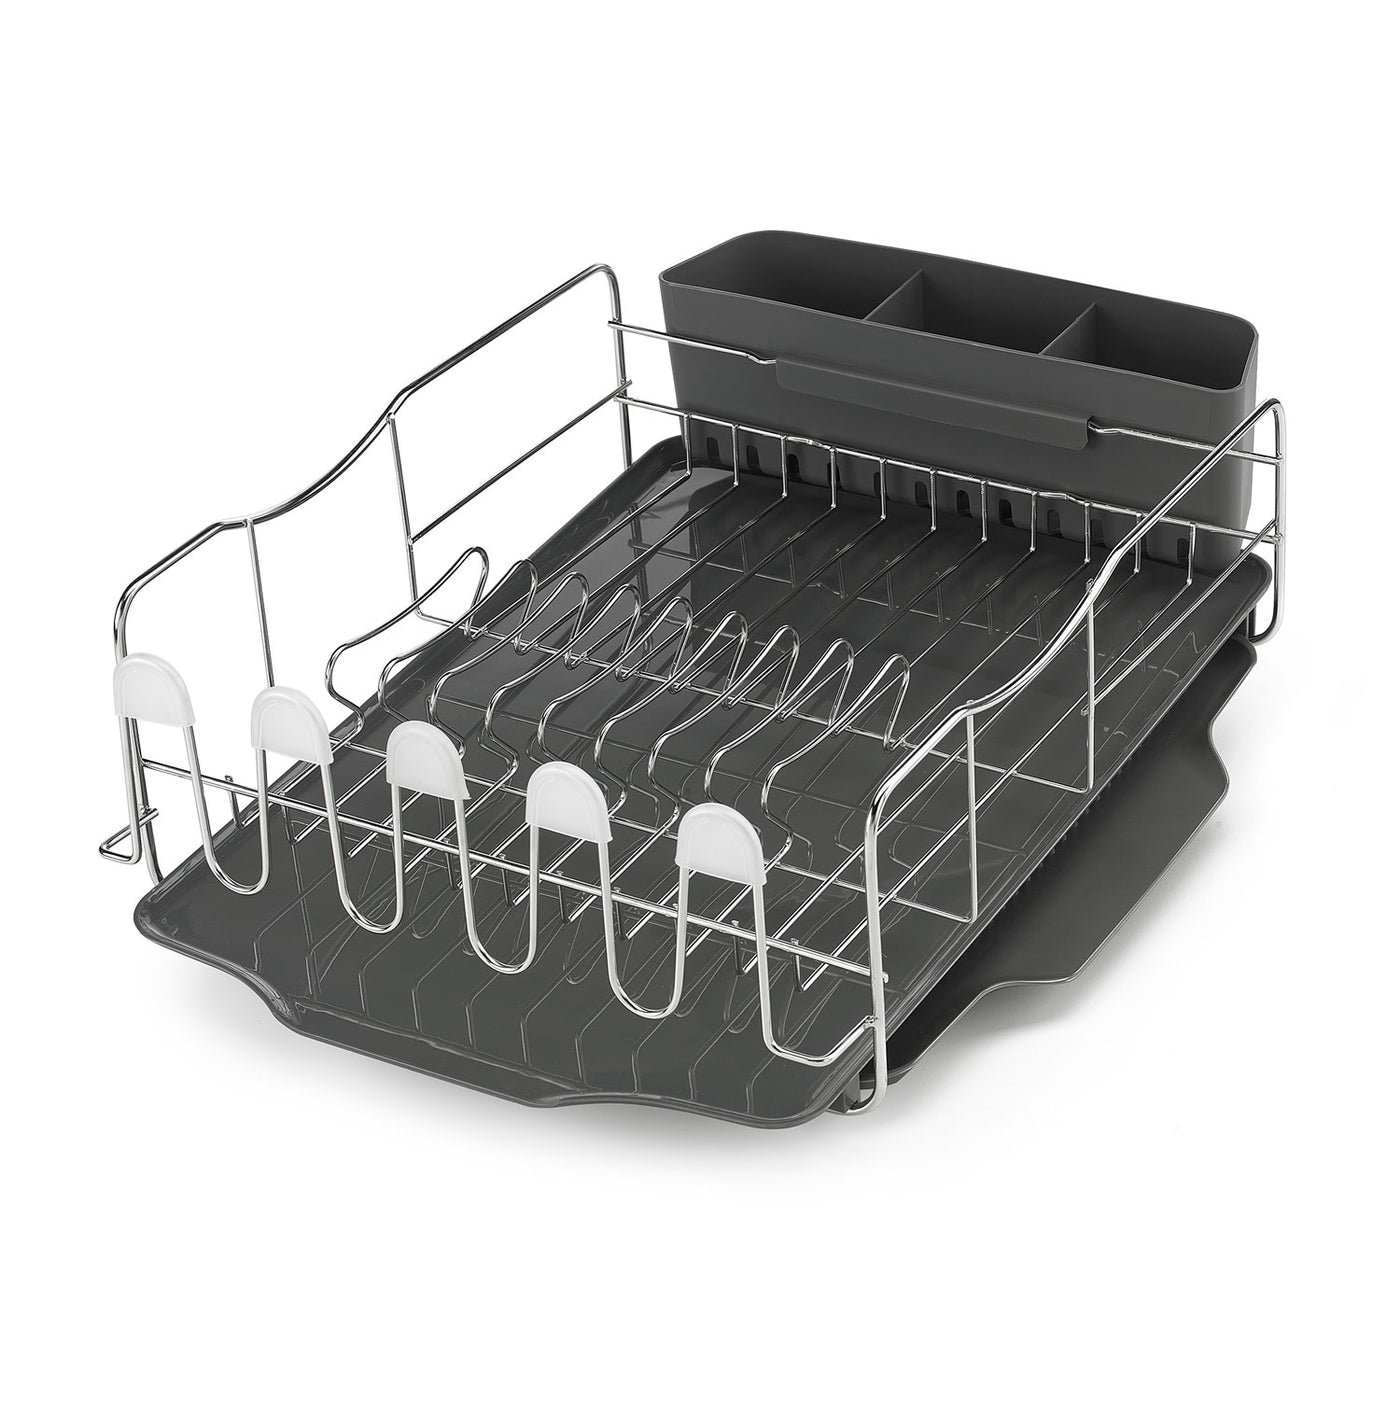 Polder Advantage Pro 4-Piece Dish Rack, Removable Slide-Out Tray, Designed for Optimal Draining, Large Capacity, Soft-Touch Rubber Caps Is Safe to